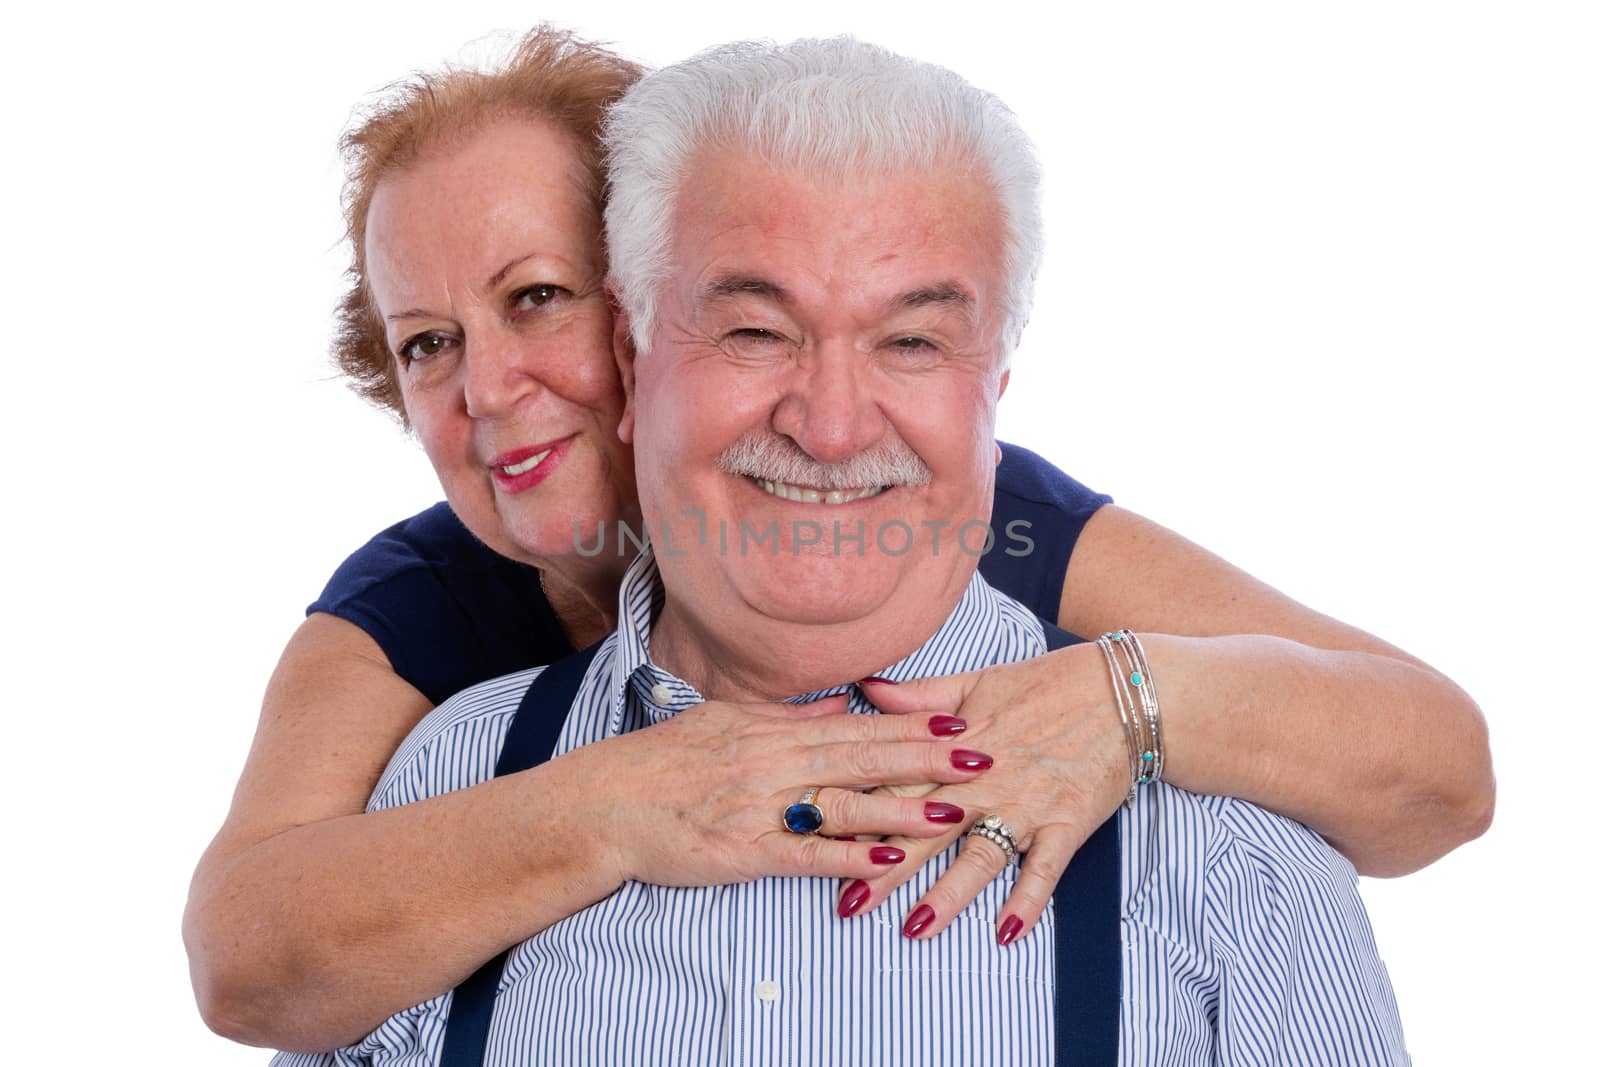 Smiling husband in pinstripe shirt with suspenders being hugged by happy wife from behind over white background